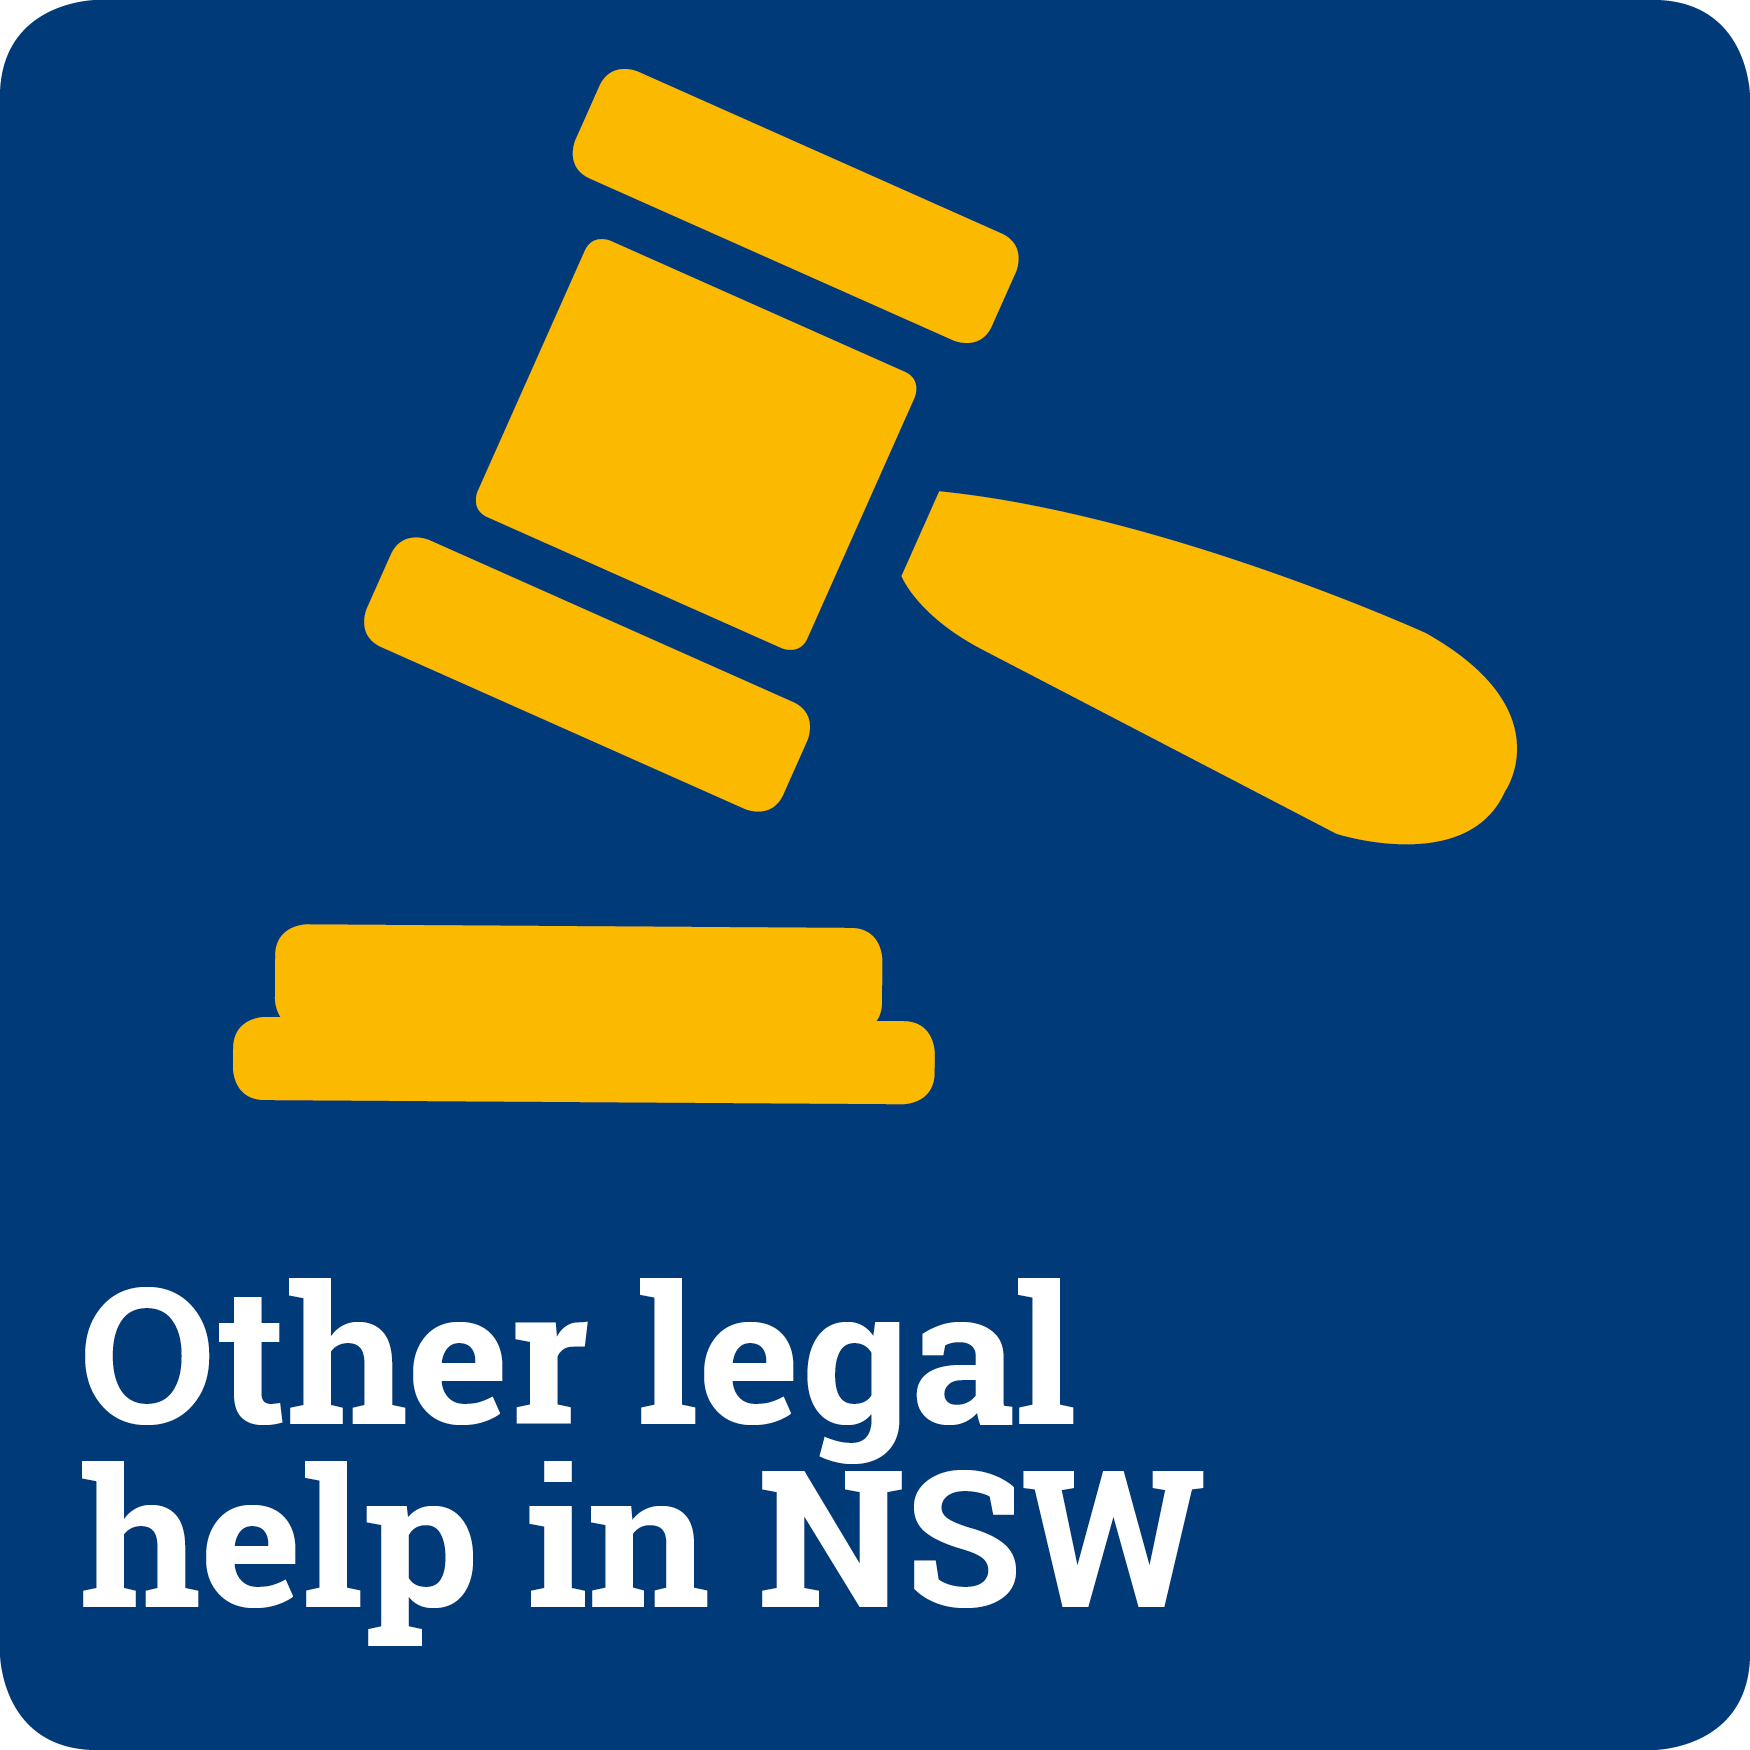 Other legal help in NSW